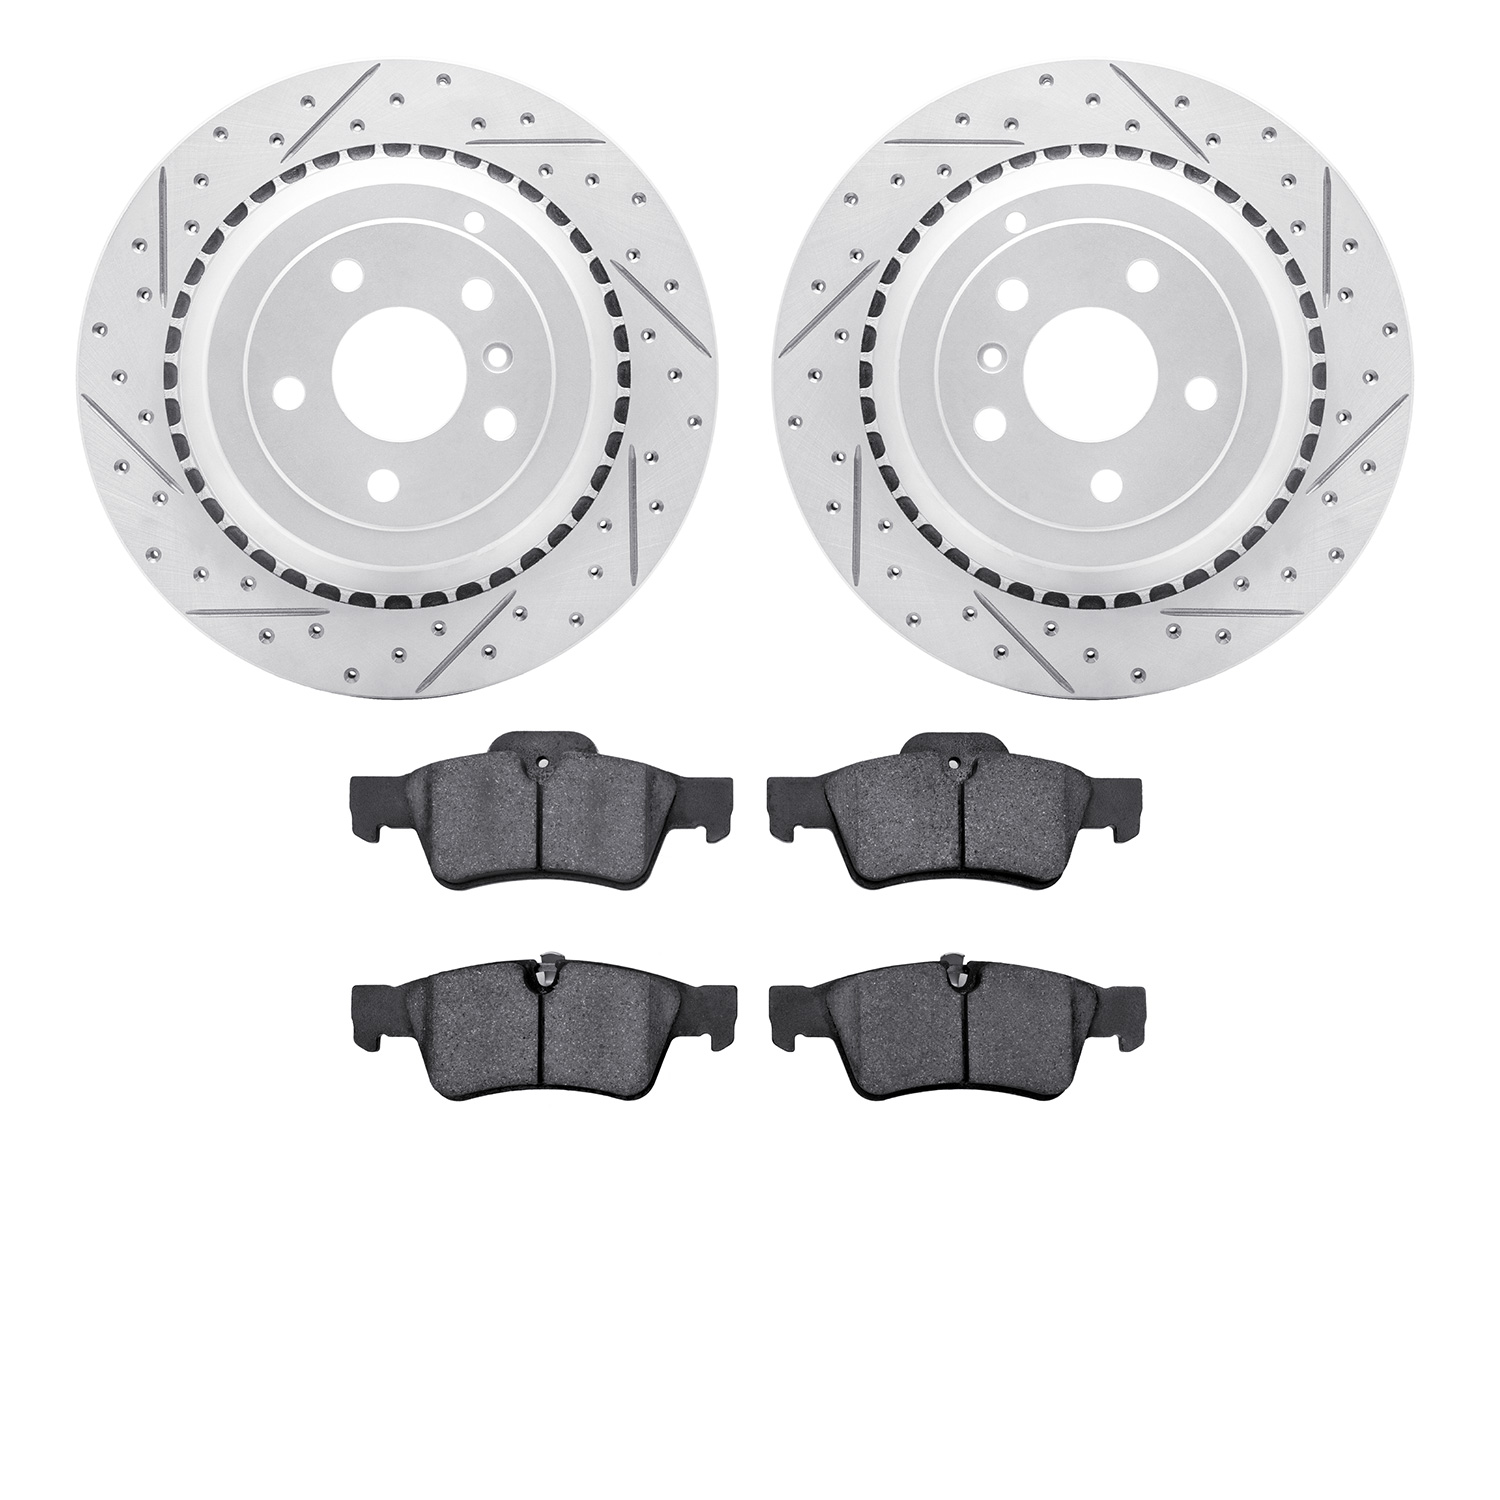 2502-63107 Geoperformance Drilled/Slotted Rotors w/5000 Advanced Brake Pads Kit, 2006-2012 Mercedes-Benz, Position: Rear